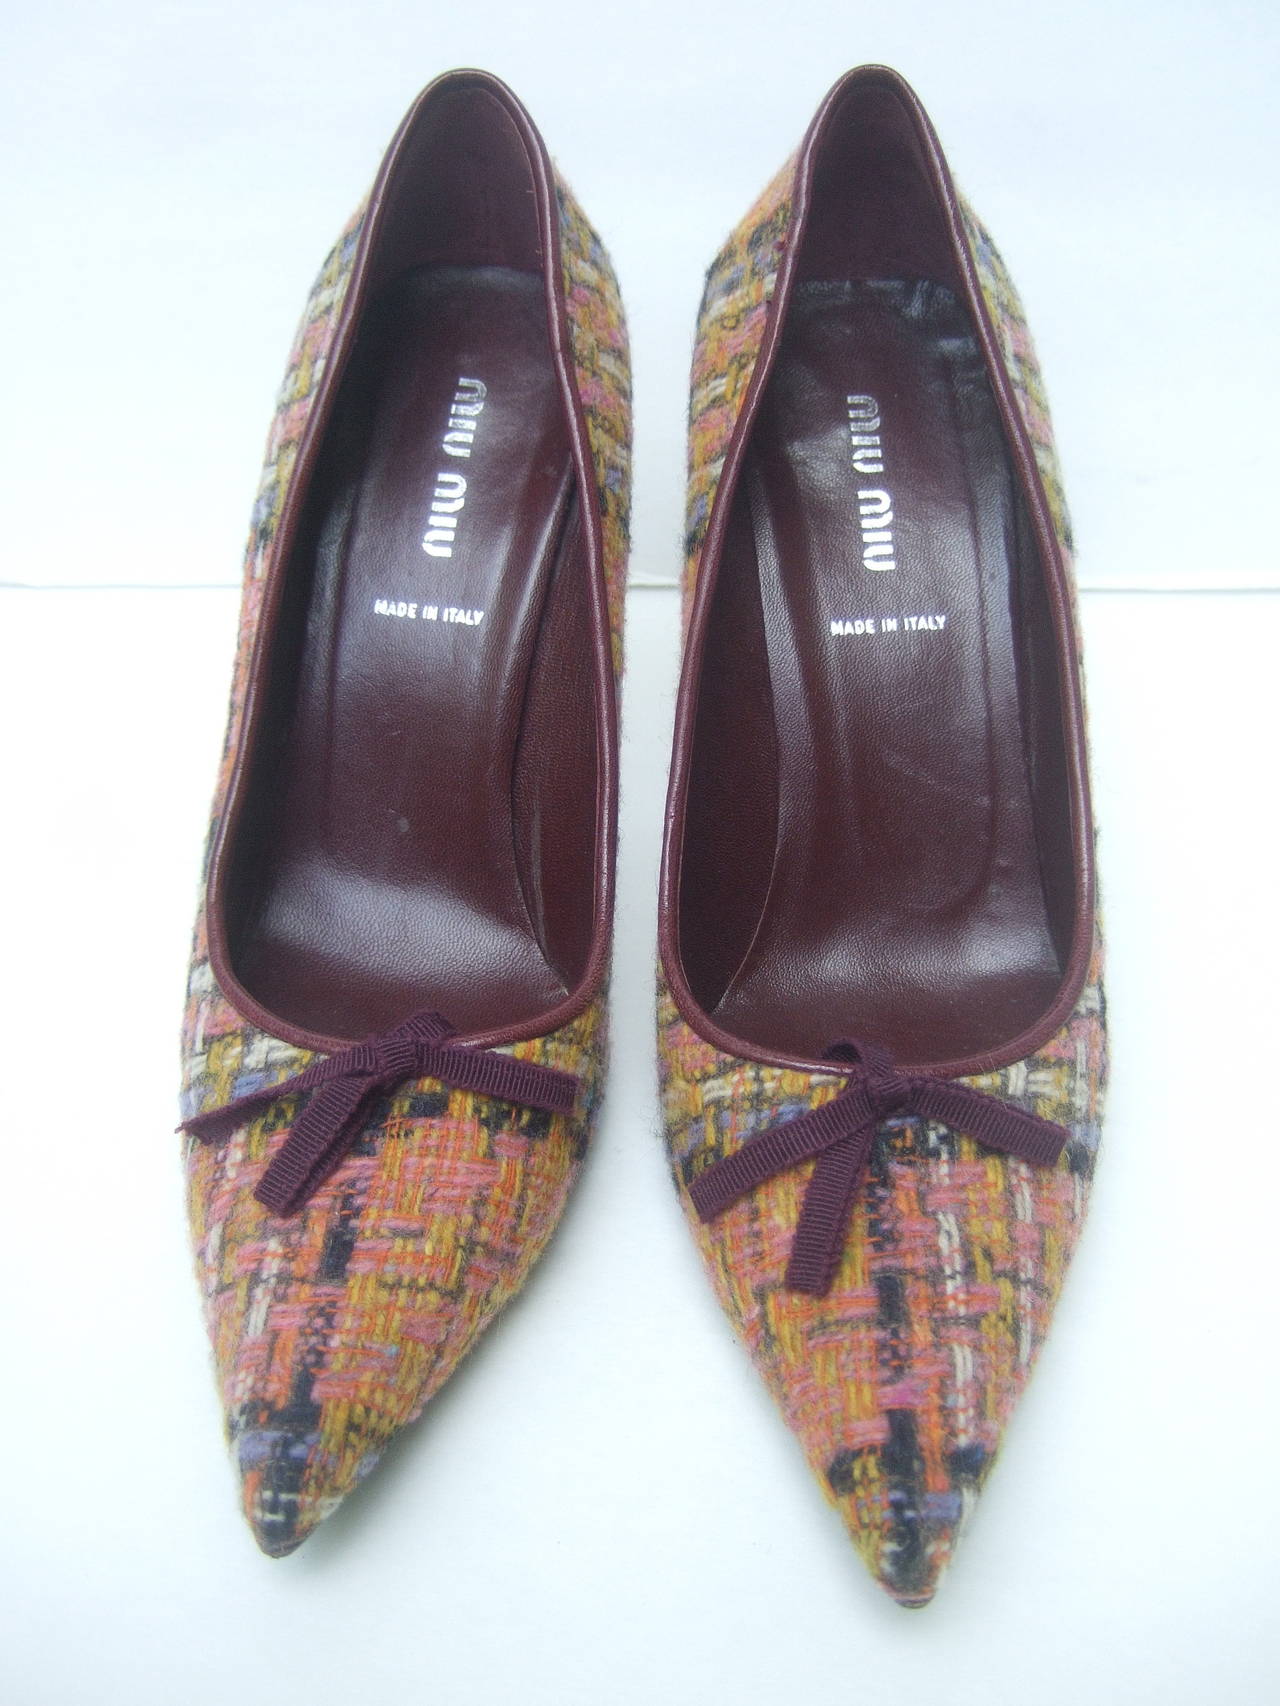 Miu Miu Plaid wool pumps Made in Italy Size 38
The stylish designer pointed toe pumps are covered
with plaid wool with groisgrain burgundy ribbon bows

The plaid wool covering is blended with pink, yellow,
orange, lavender with streaks of